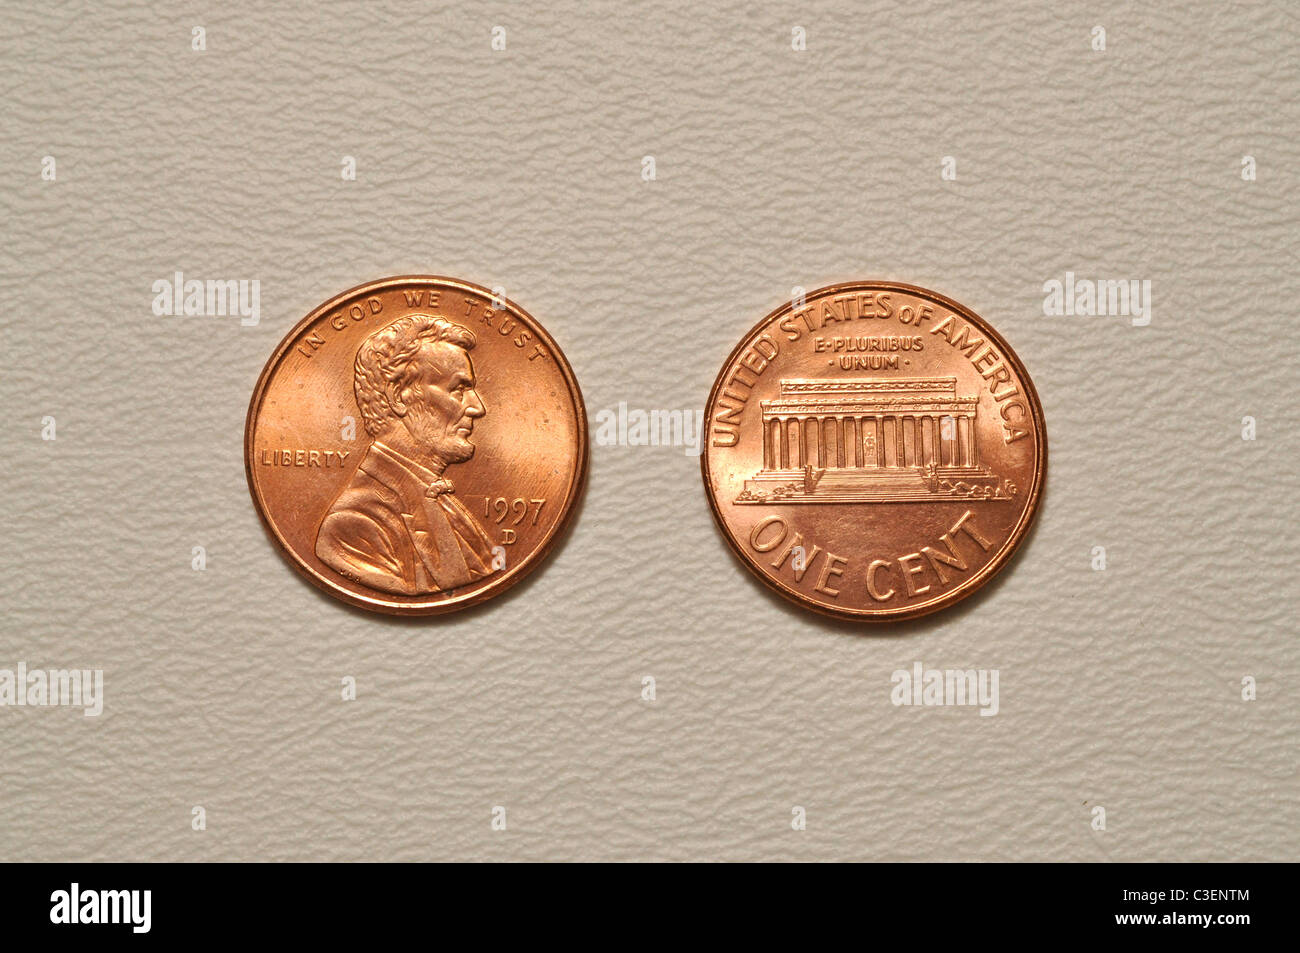 The front and back of a U.S. penny. Stock Photo